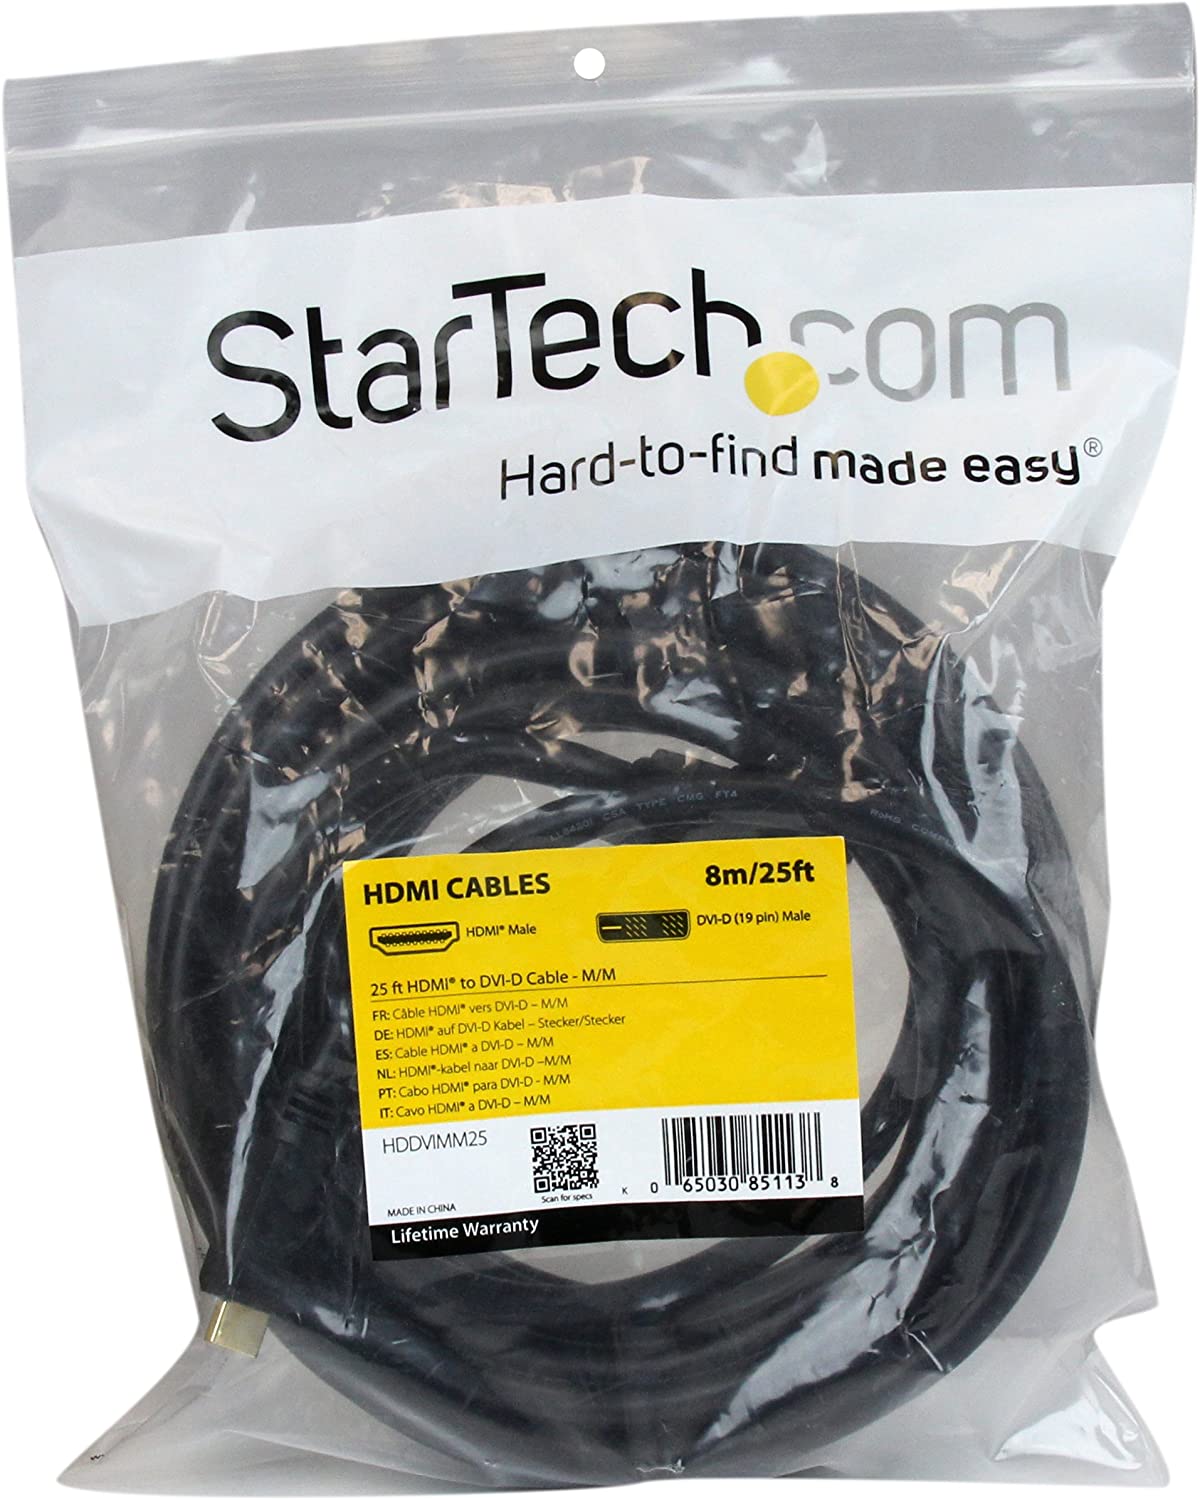 StarTech.com 25 ft HDMI® to DVI-D Cable - HDMI to DVI Adapter / Converter Cable - 1x DVI-D Male, 1x HDMI Male - Black, 25 feet (HDDVIMM25) 25 ft / 7.5 m Standard Packaging